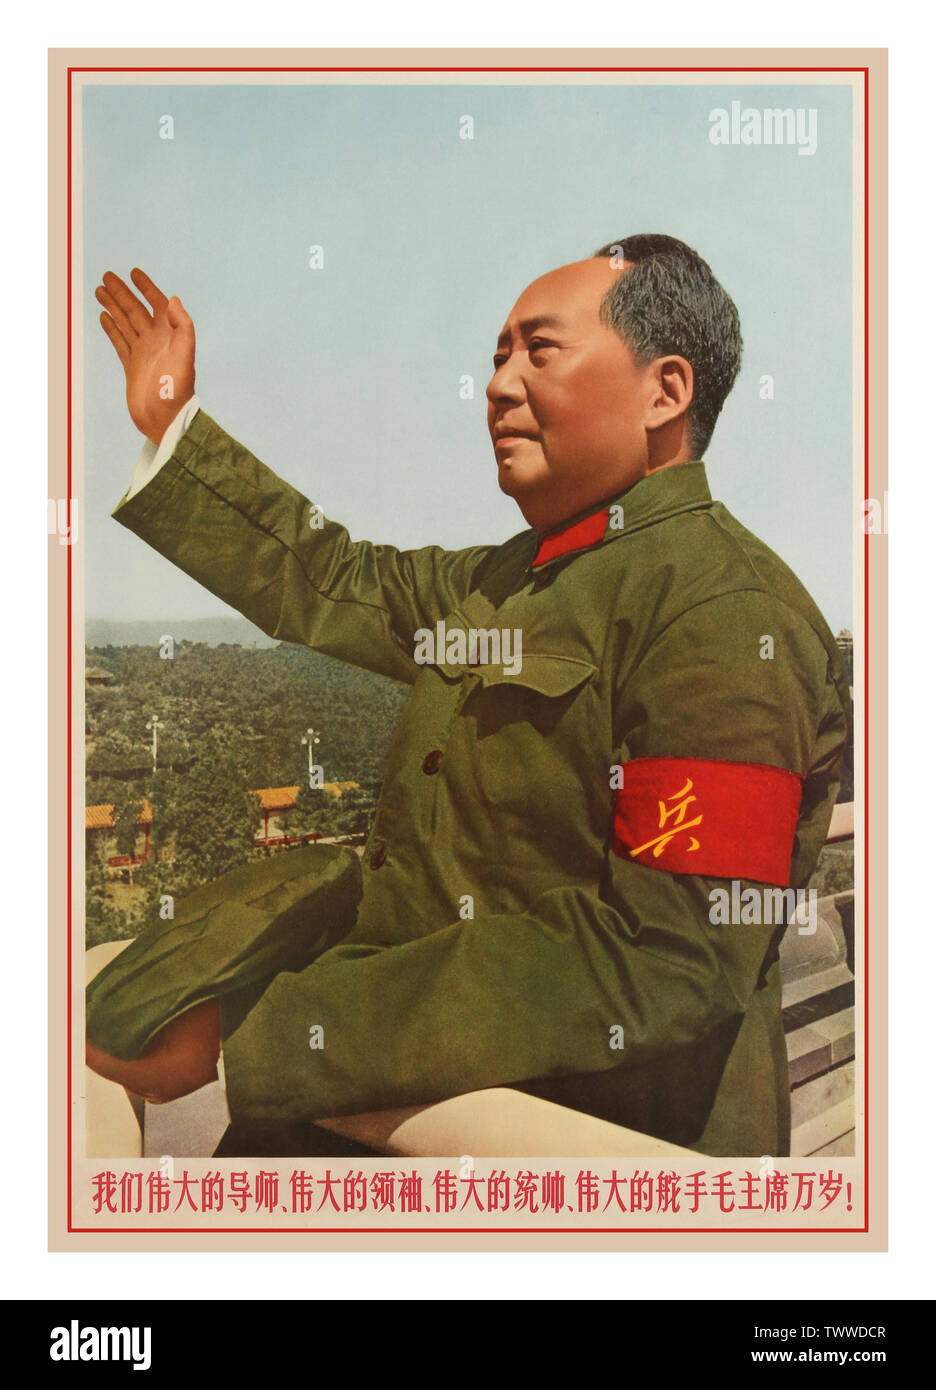 Vintage Chinese Propaganda poster: “Long live the great